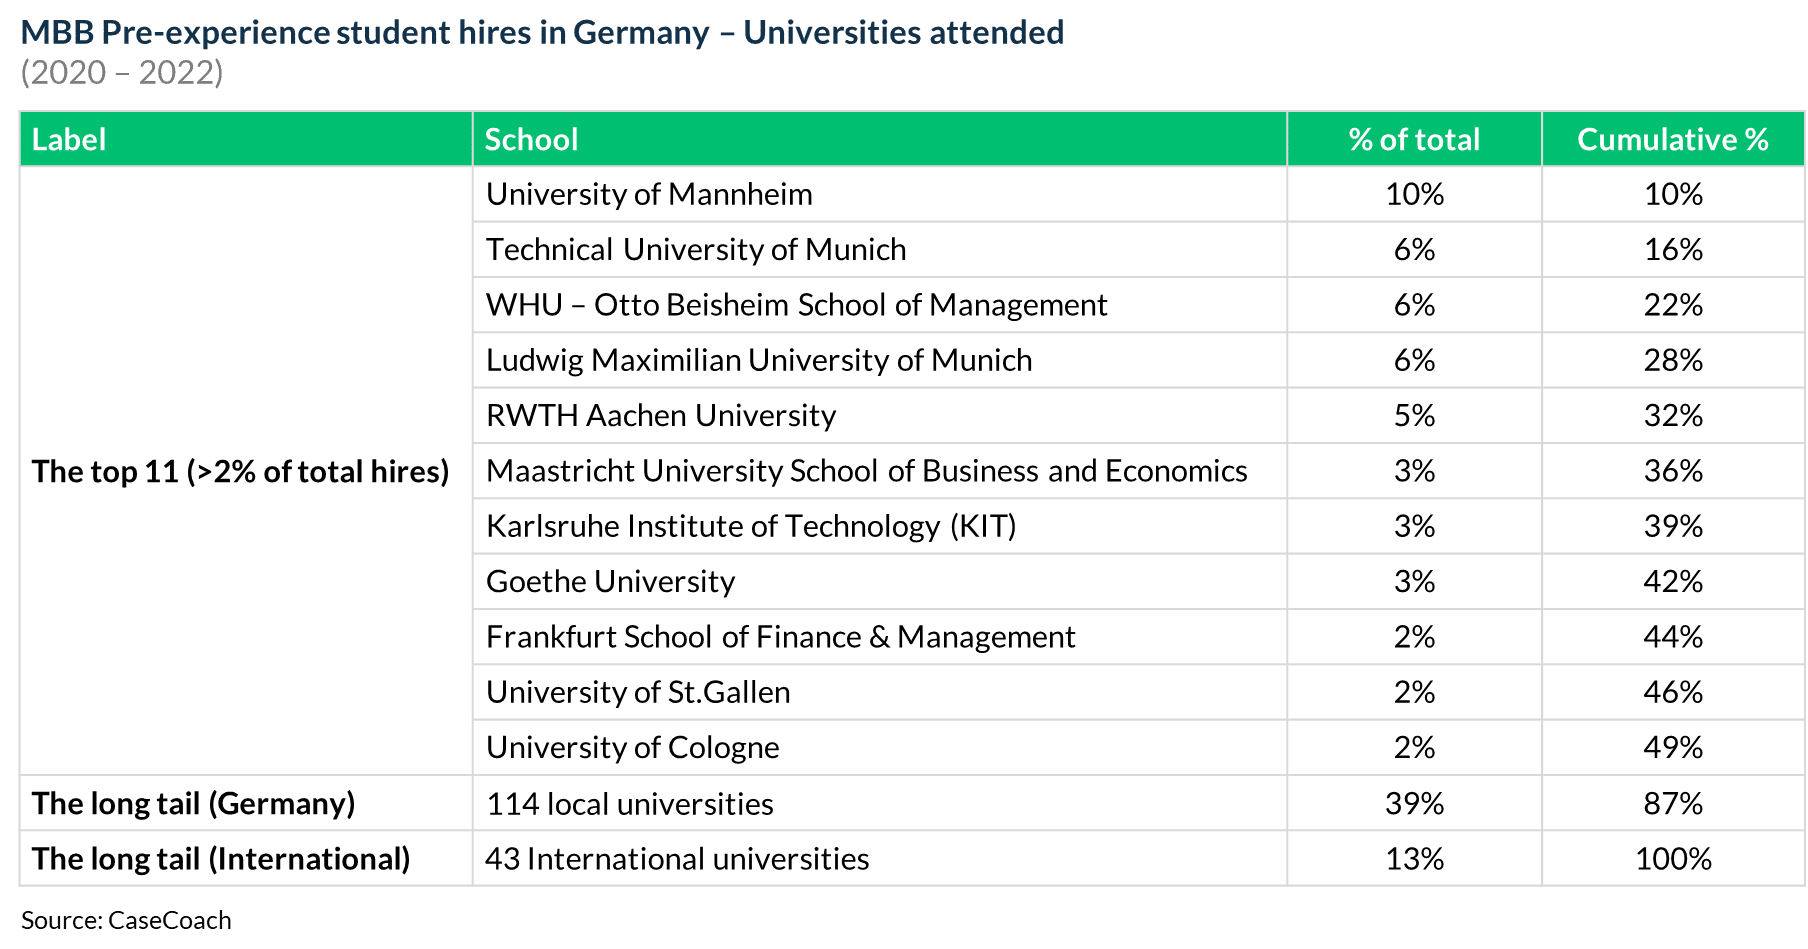 A view of the universities attended by pre-experienced student hires at MBB's Germany offices